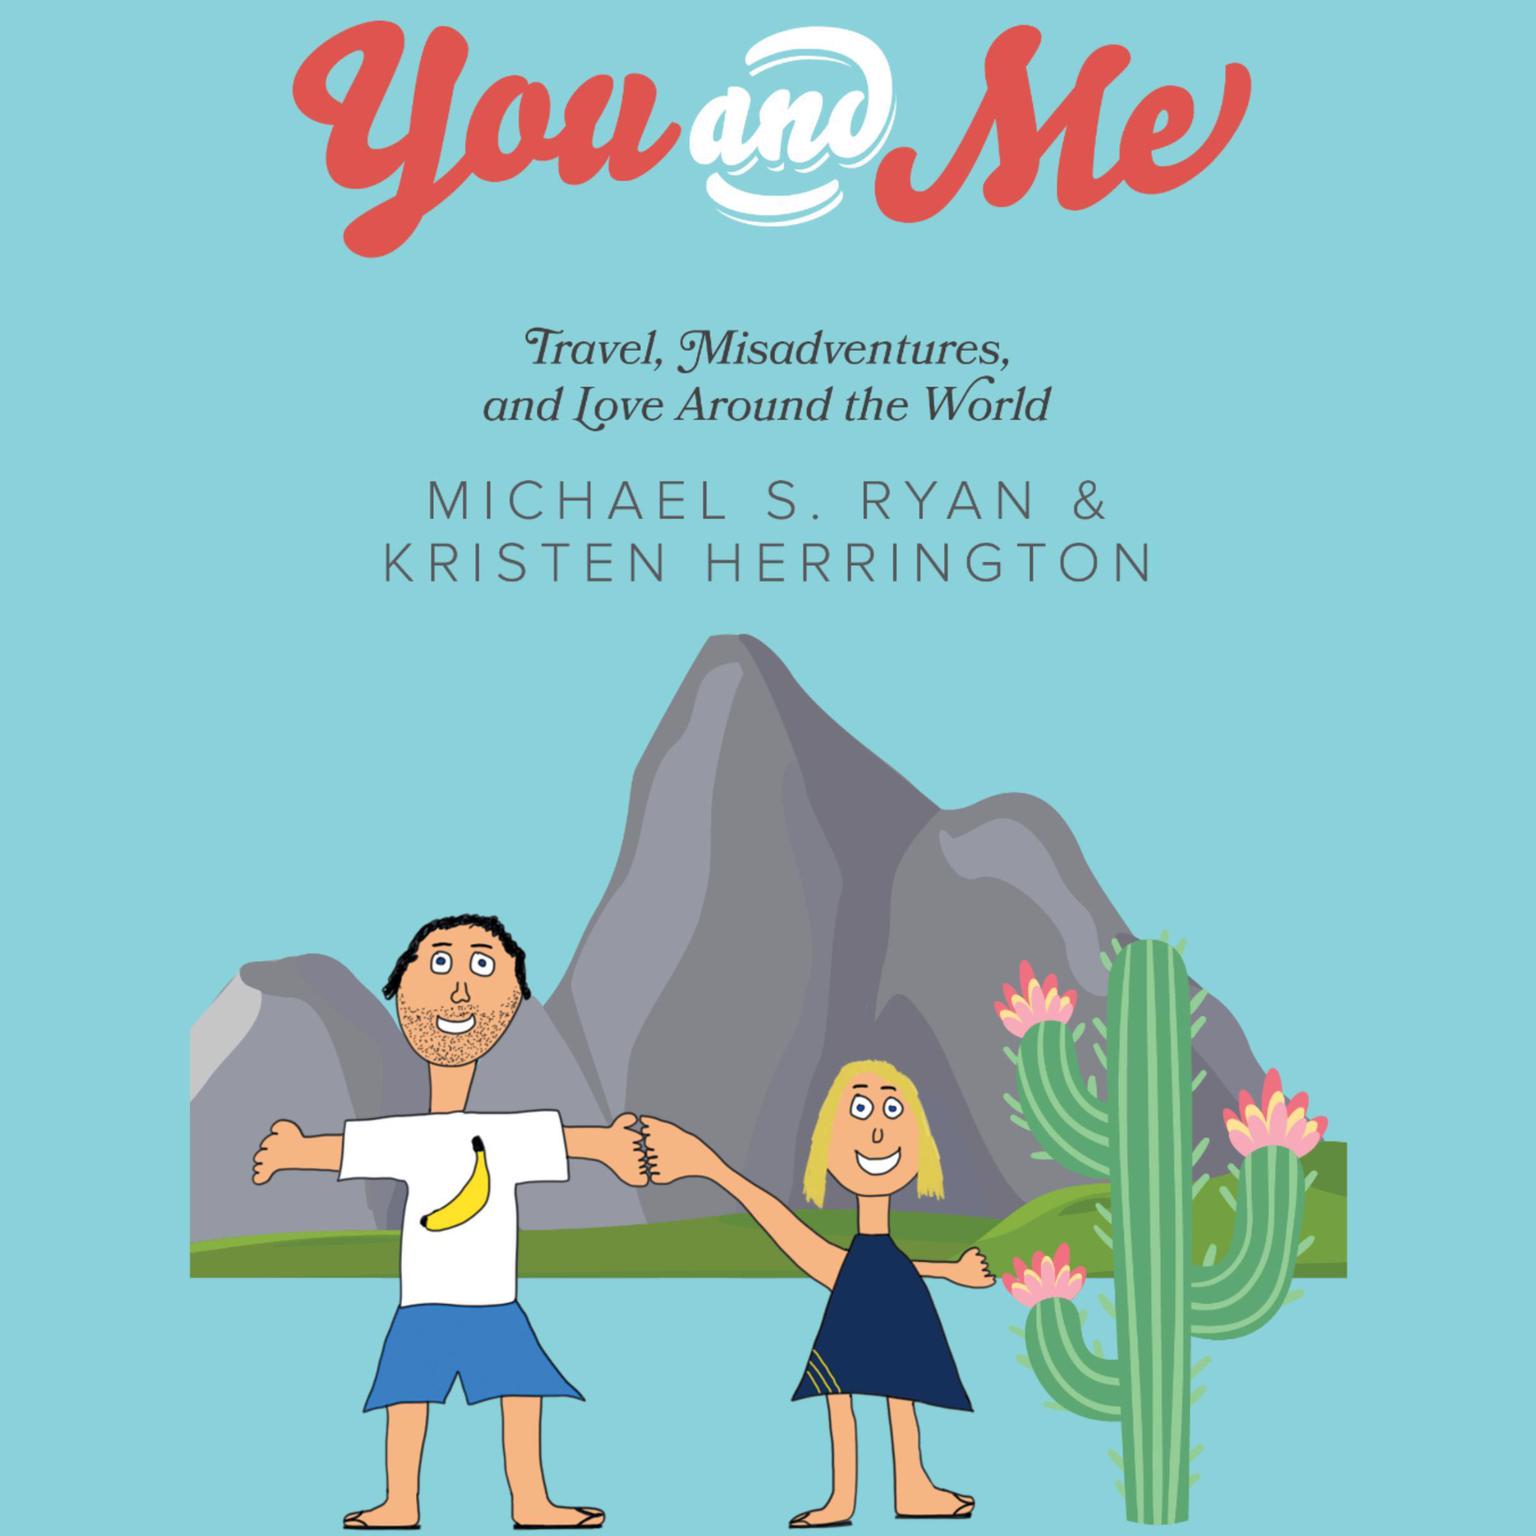 You and Me: Travel, Misadventures, and Love Around the World Audiobook, by Kristen Herrington